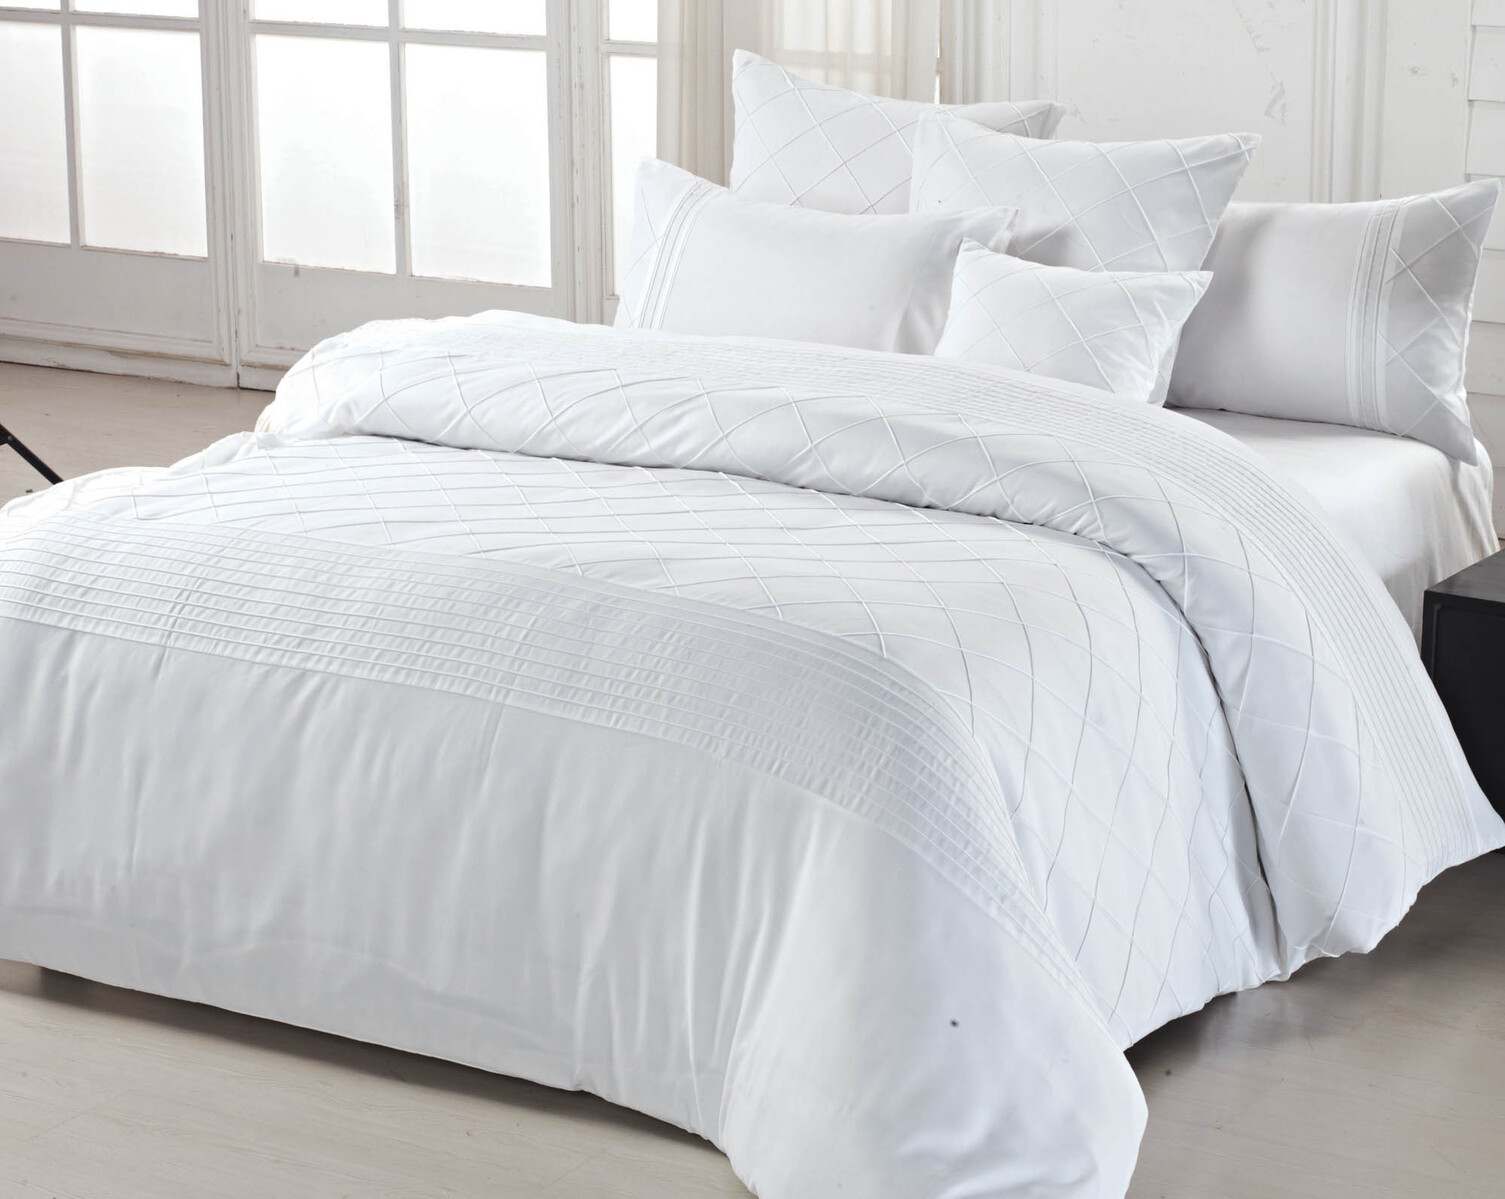 Lamere White Diamond Quilt Cover Set By Luxton Manchester Direct